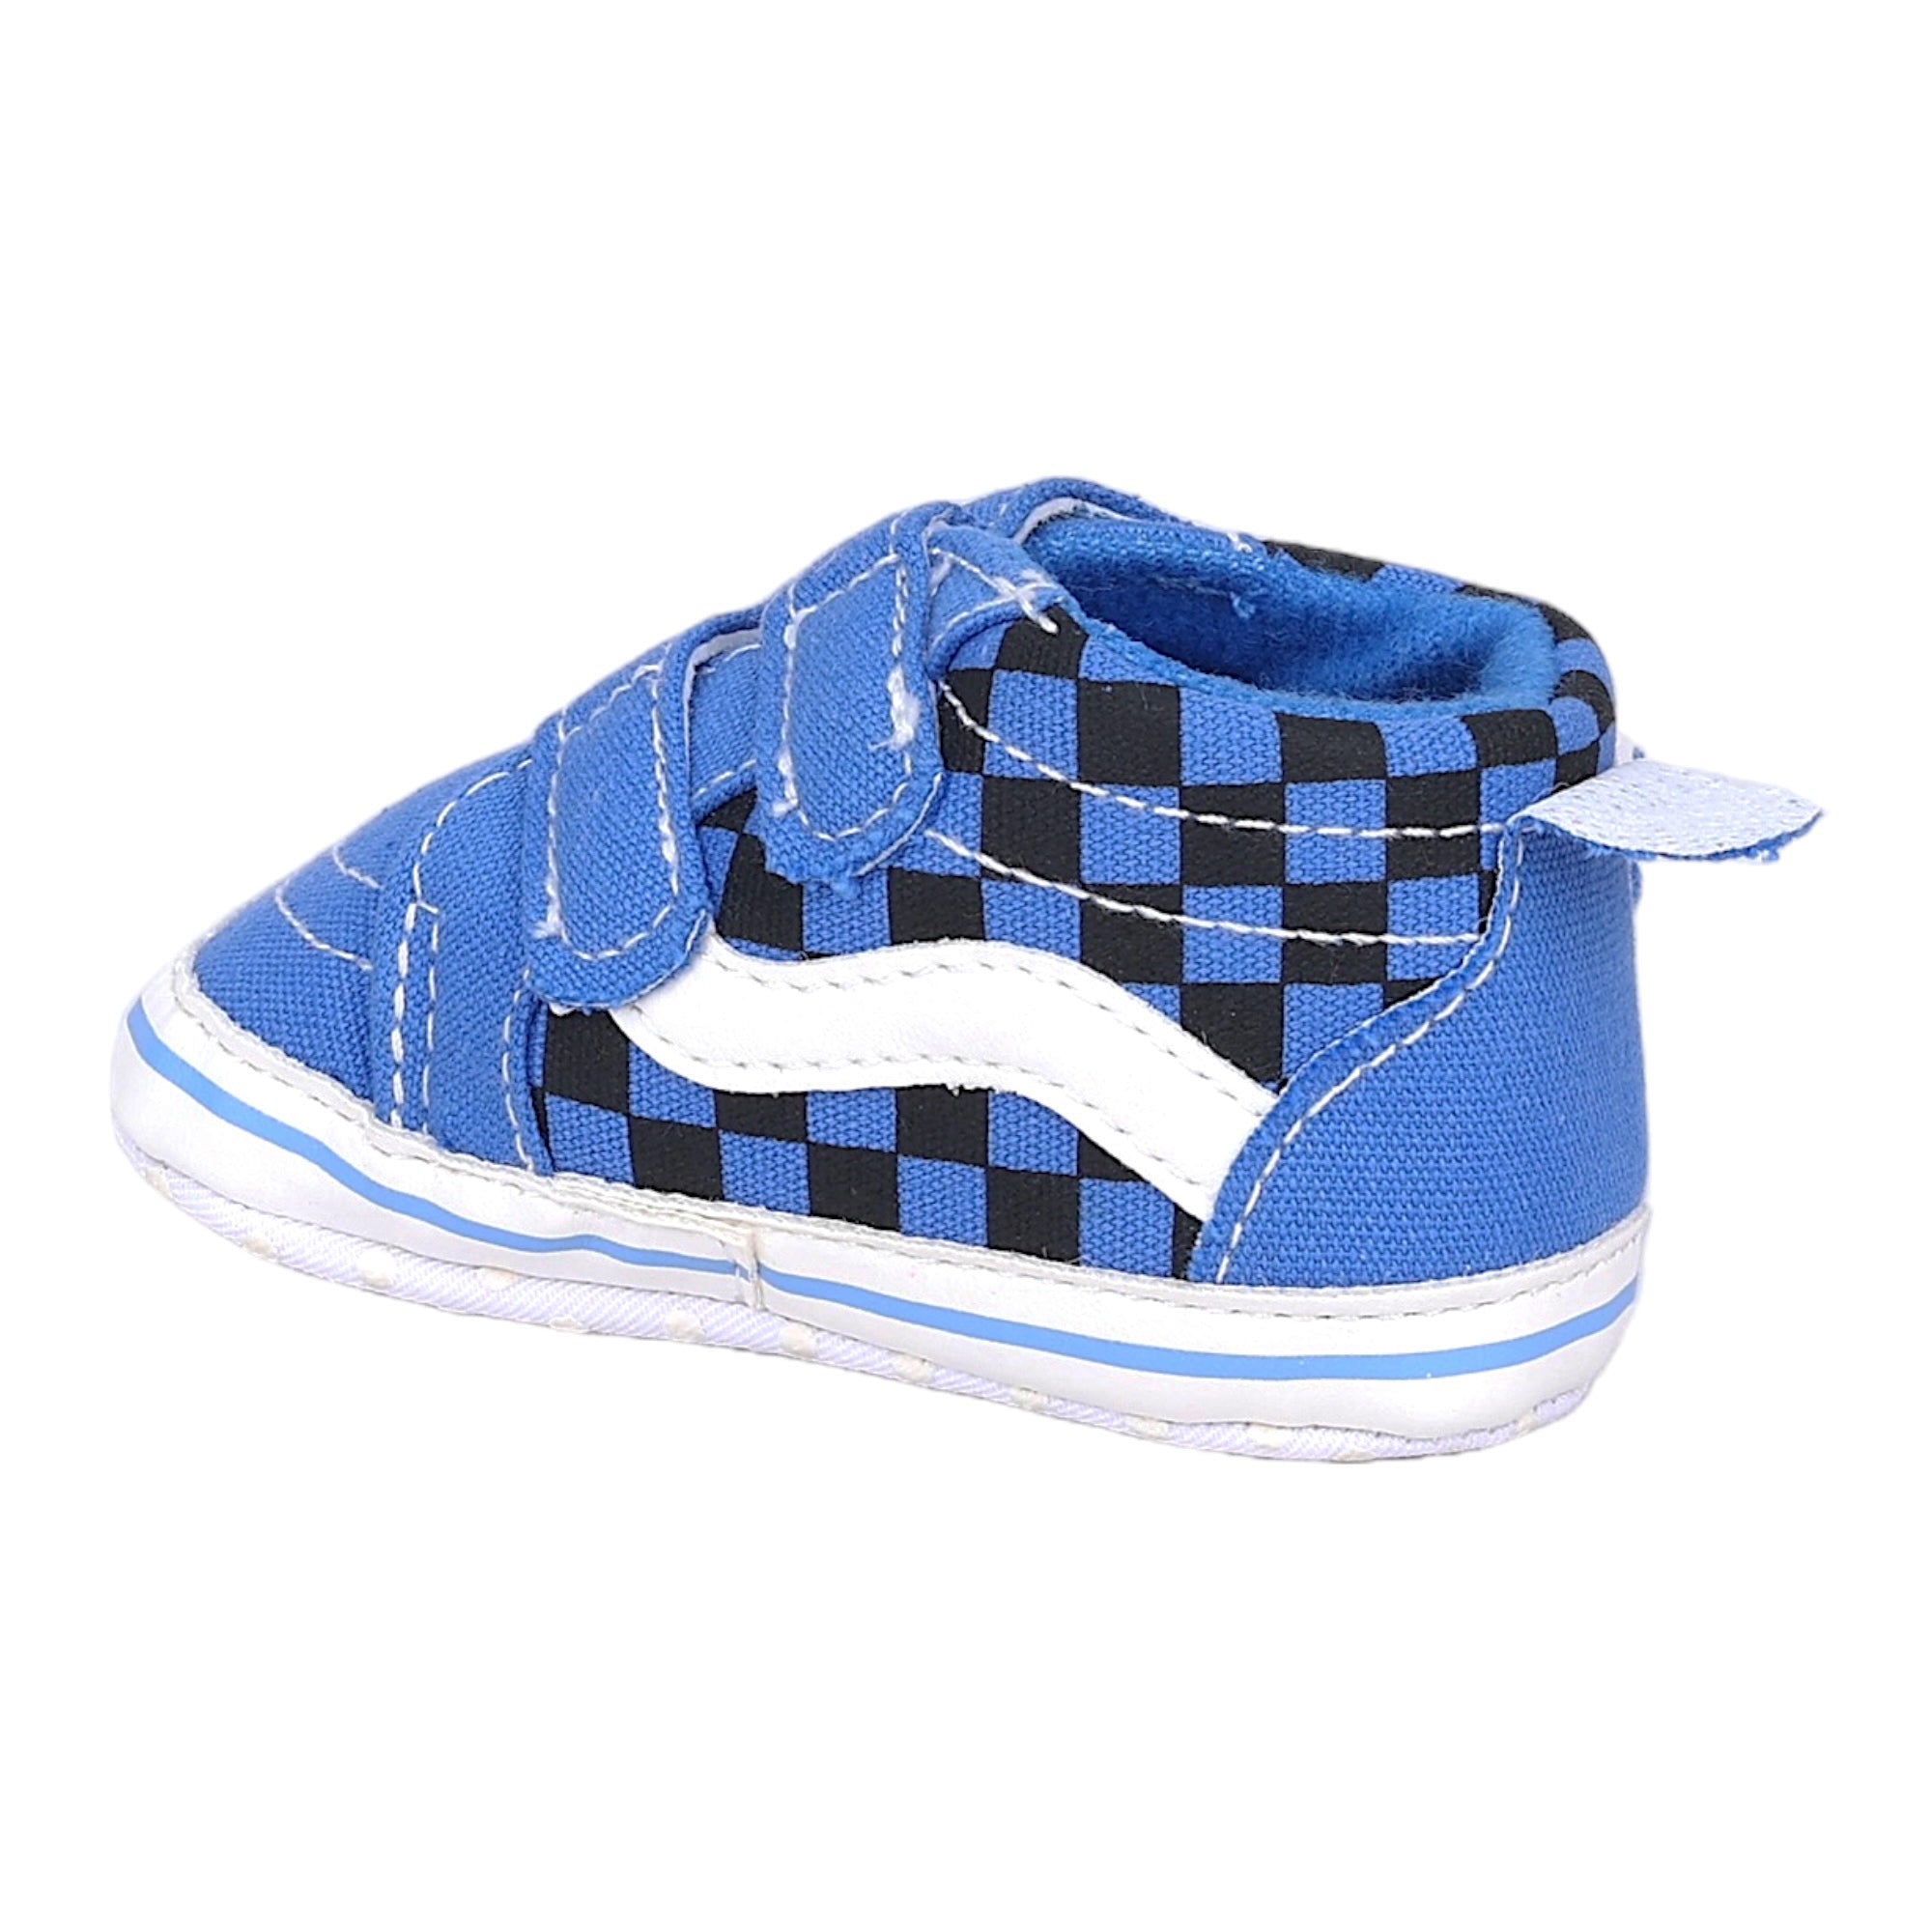 Baby Moo Stylish Casual Velcro Straps Anti-Skid Sneakers - Blue